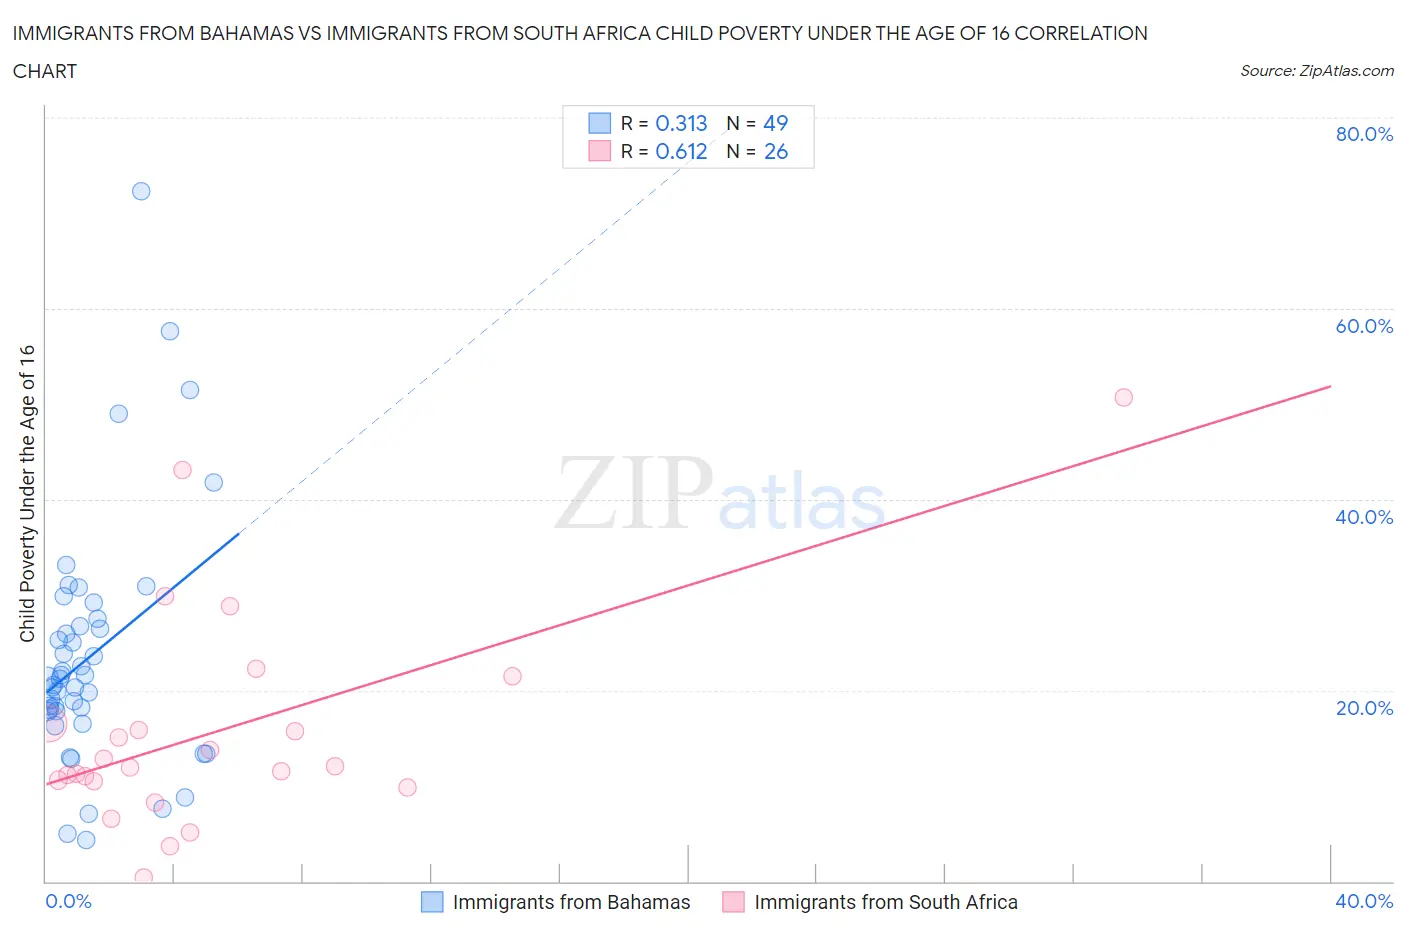 Immigrants from Bahamas vs Immigrants from South Africa Child Poverty Under the Age of 16